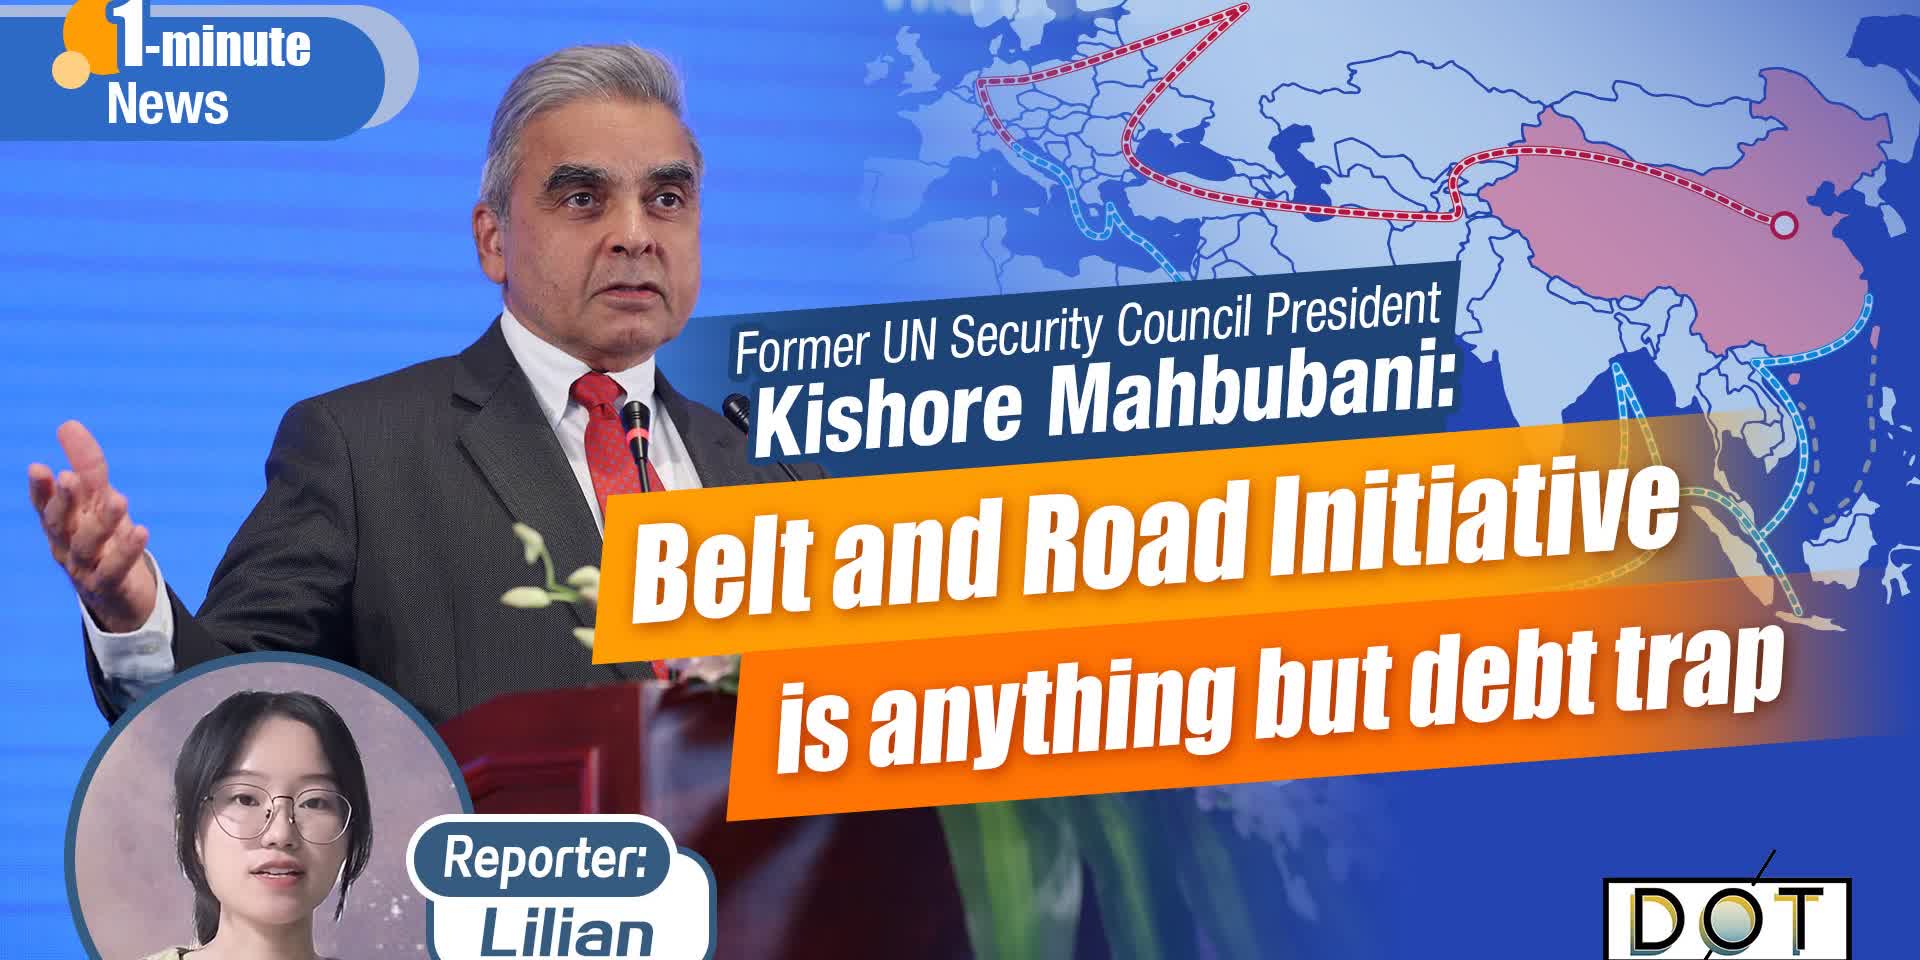 1-minute News | Former UN Security Council President Kishore Mahbubani: BRI is anything but debt trap